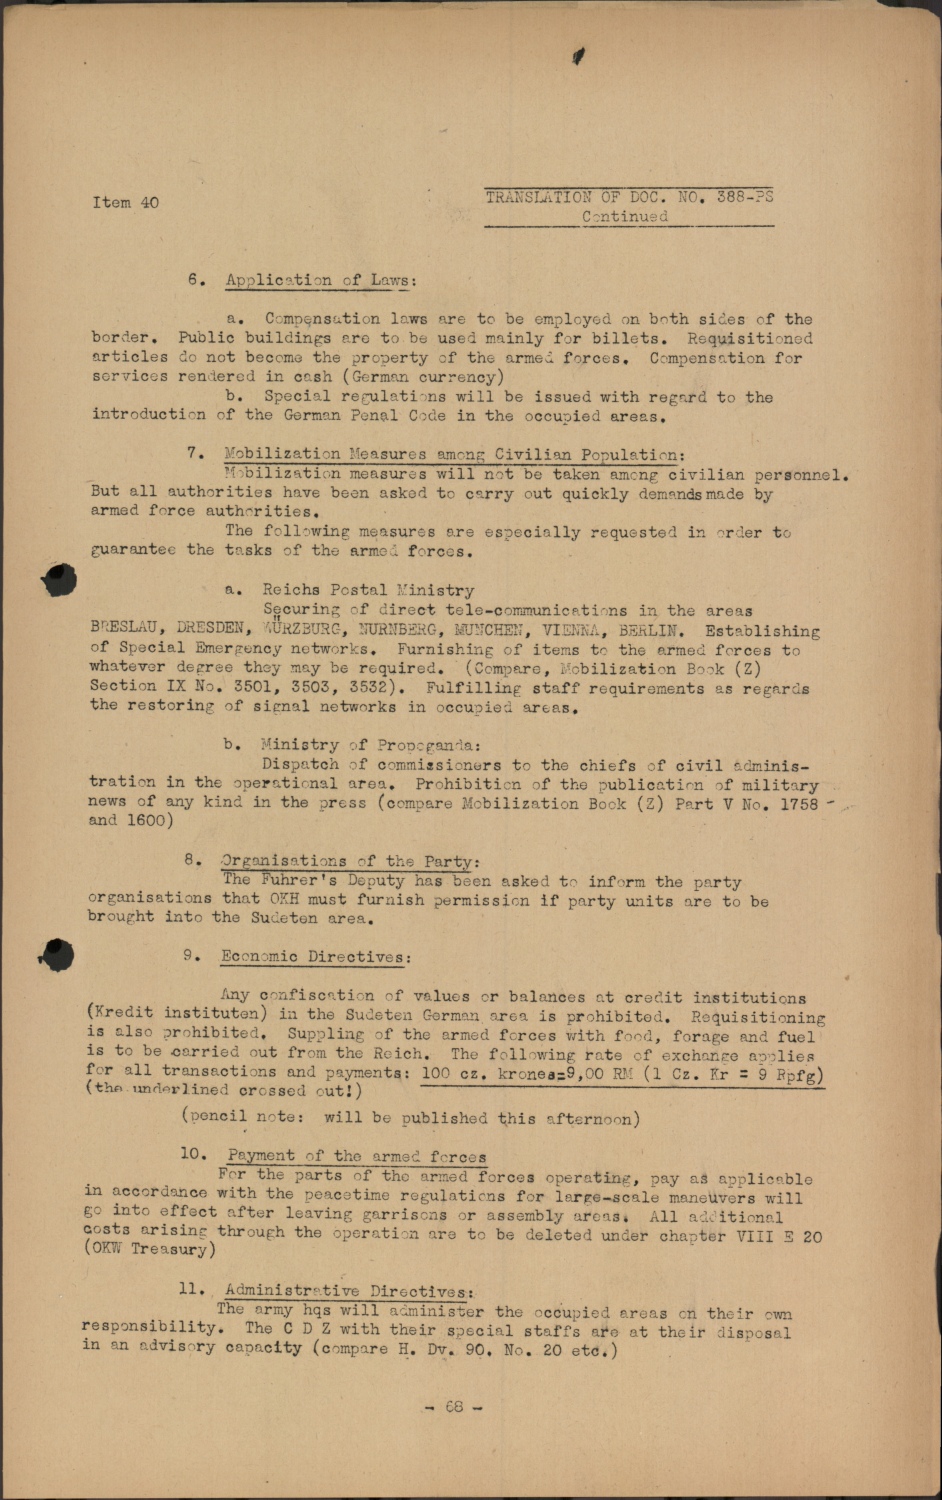 Scanned document page 70